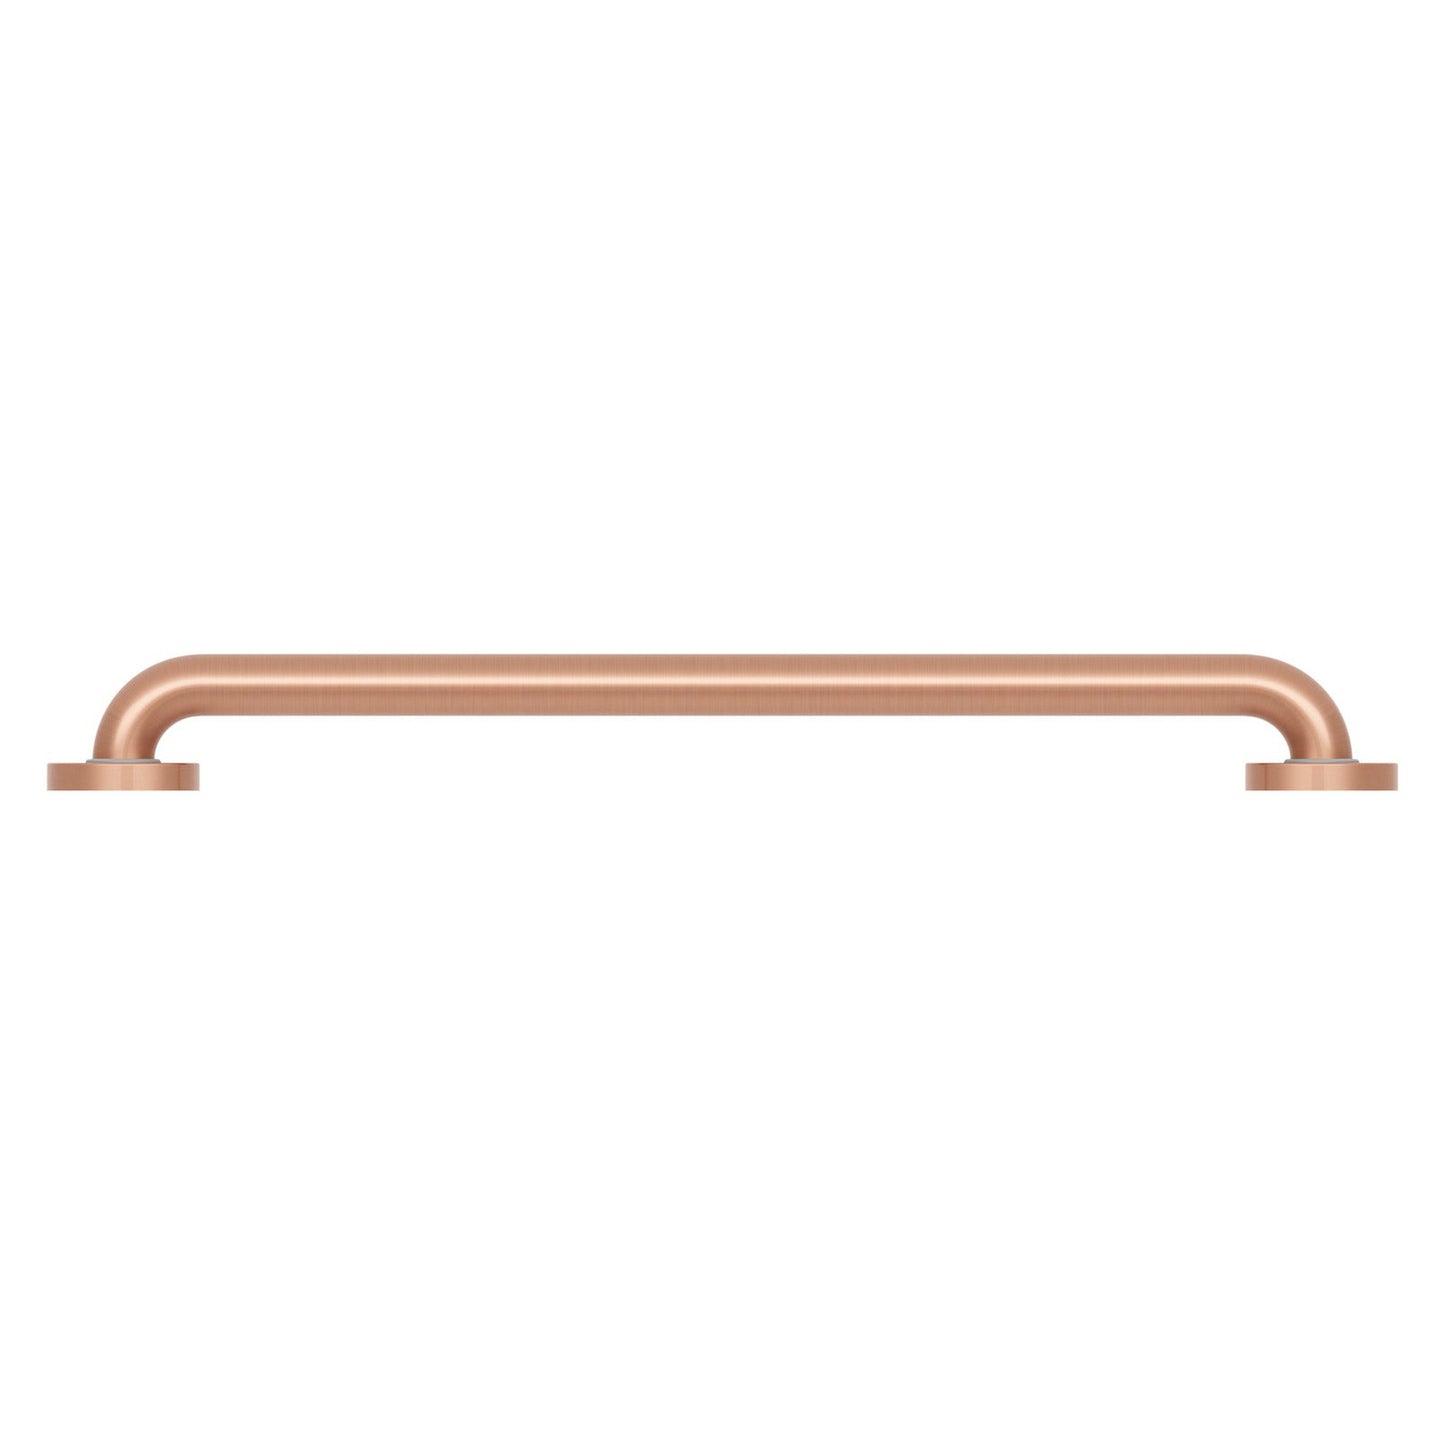 Evekare 24" x 1.25" Stainless Steel Concealed Mount Grab Bar in Brushed Rose Gold